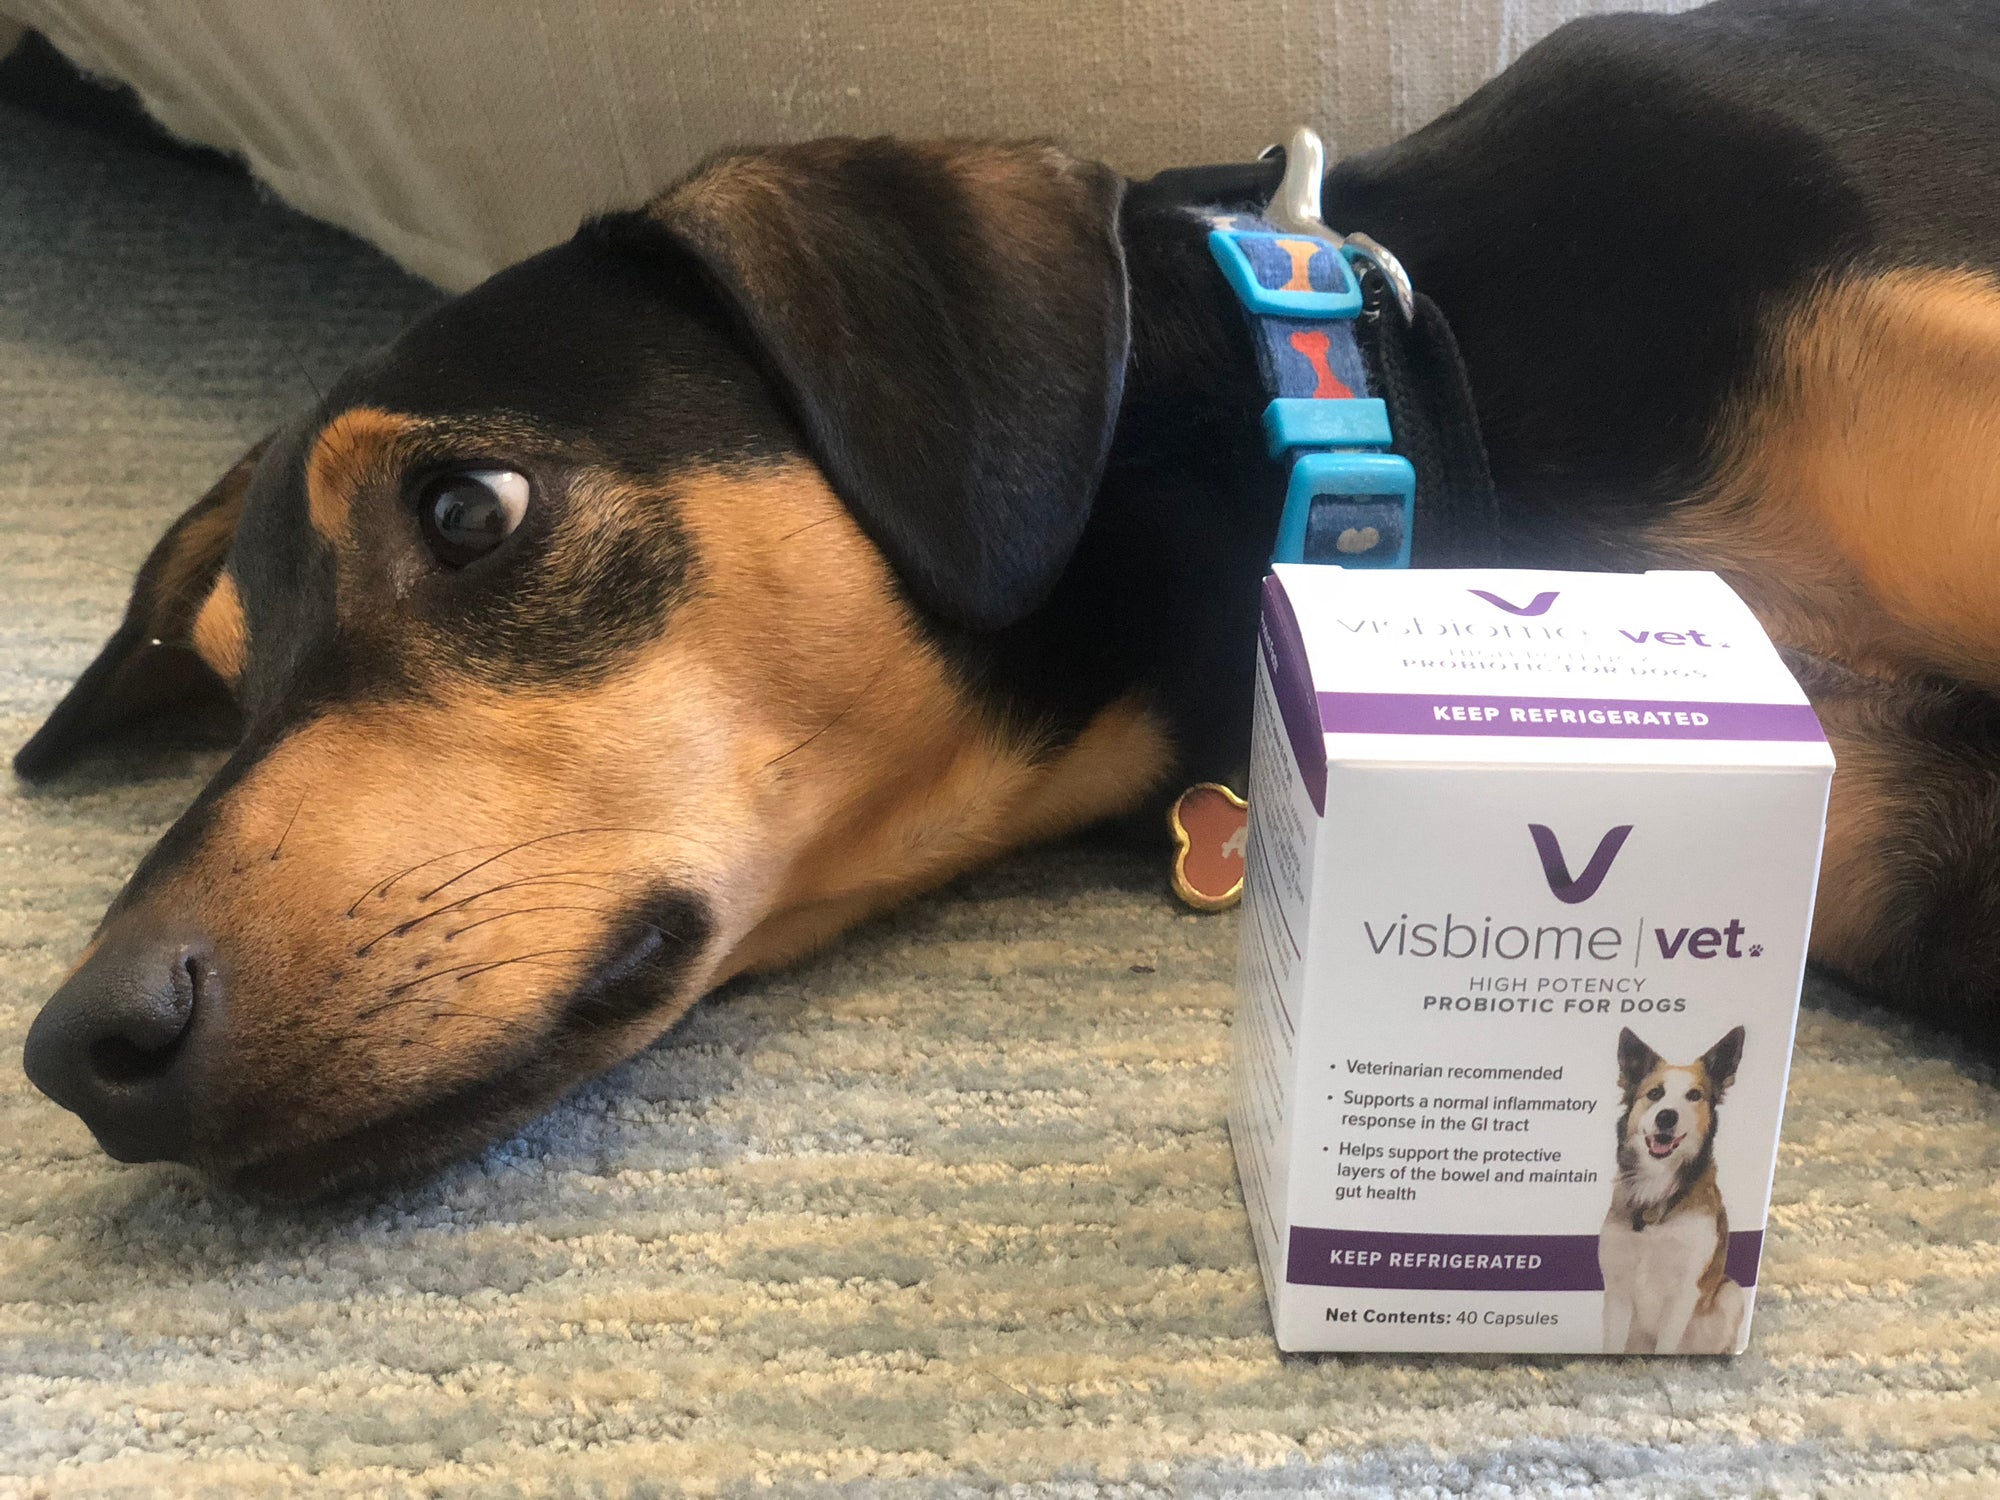 New Study Suggests Visbiome Vet May Support Gastrointestinal Health in Dogs Undergoing Chemotherapy Treatment